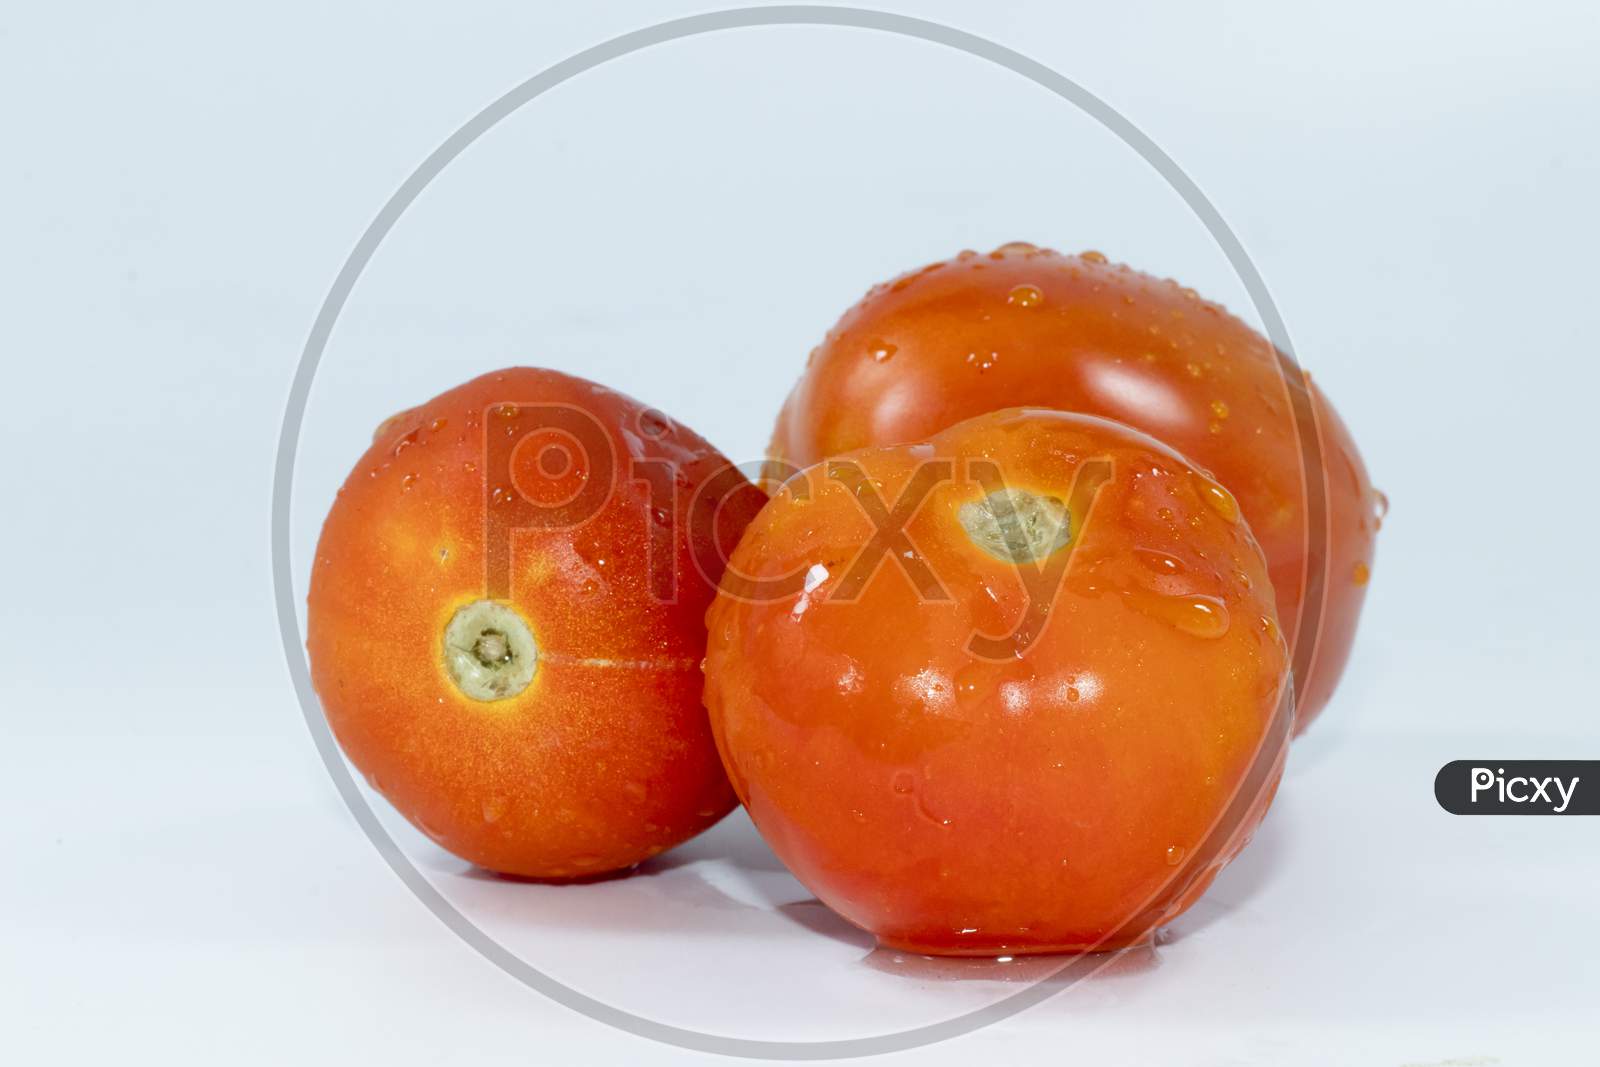 Red tomatto, isolated on a white background